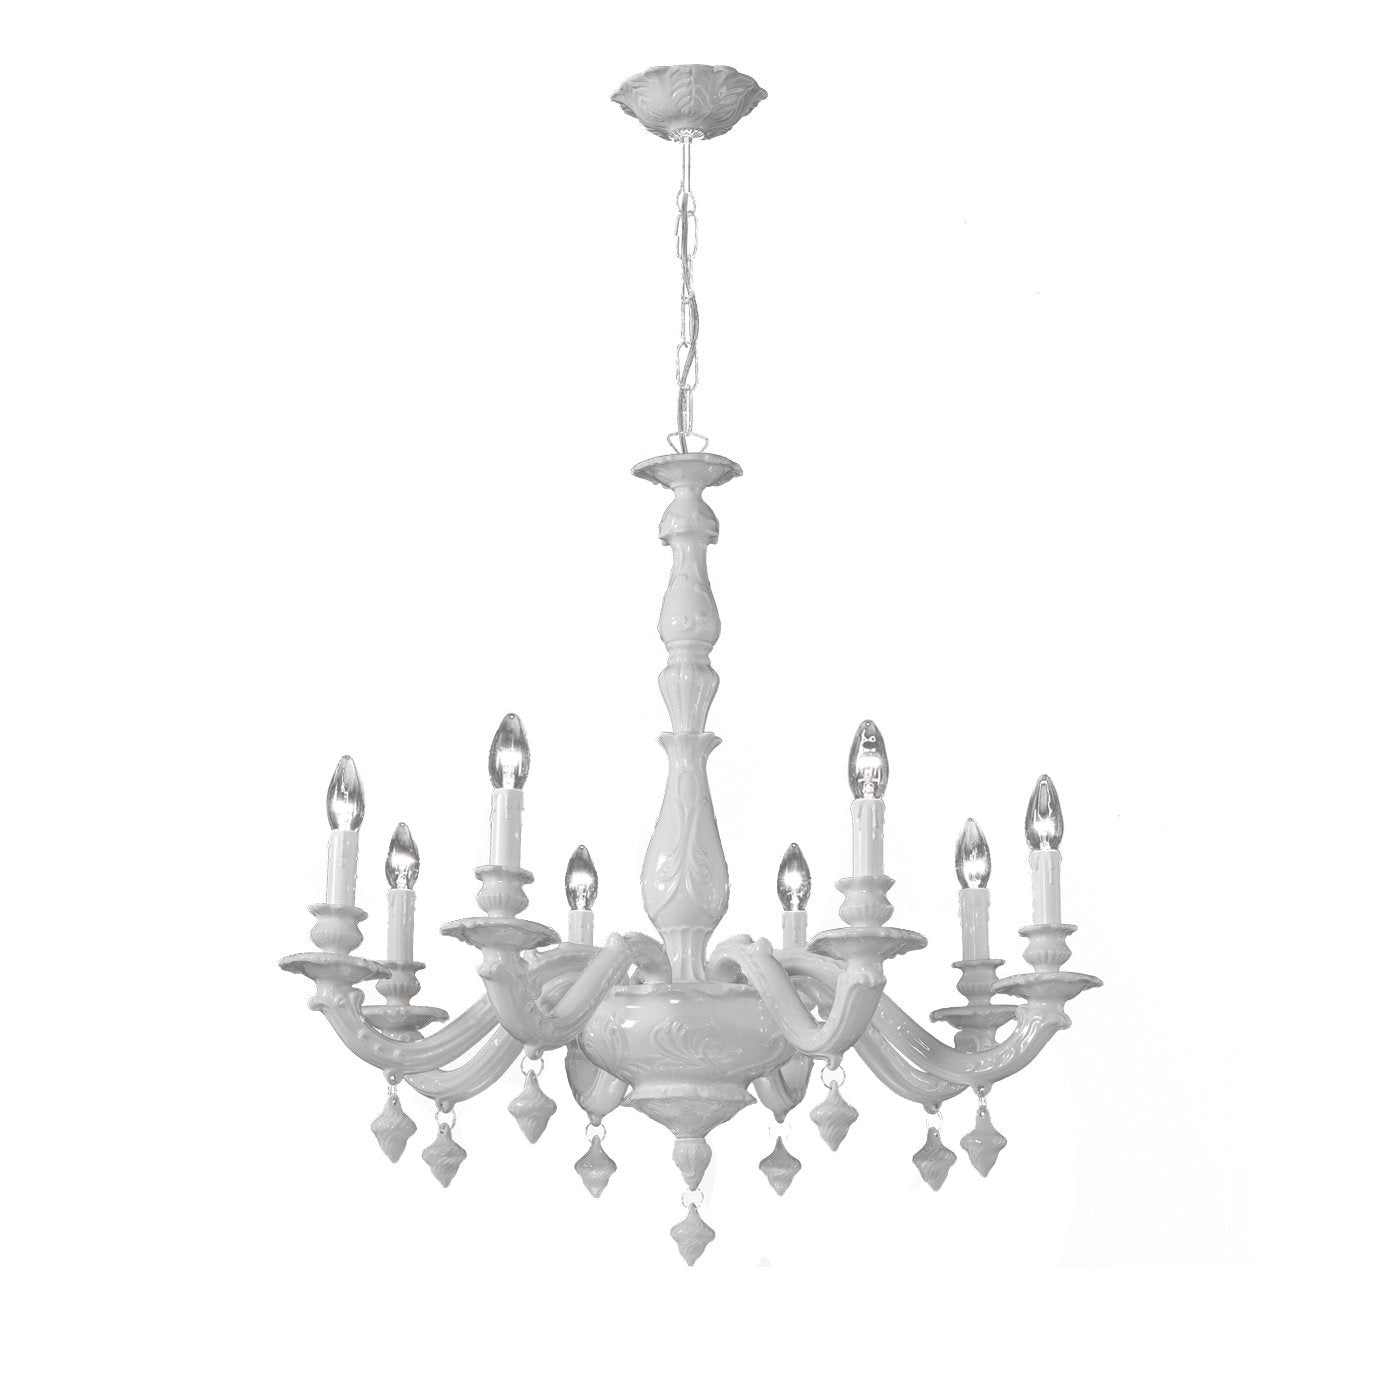 Tintoretto Chandelier  - Main view